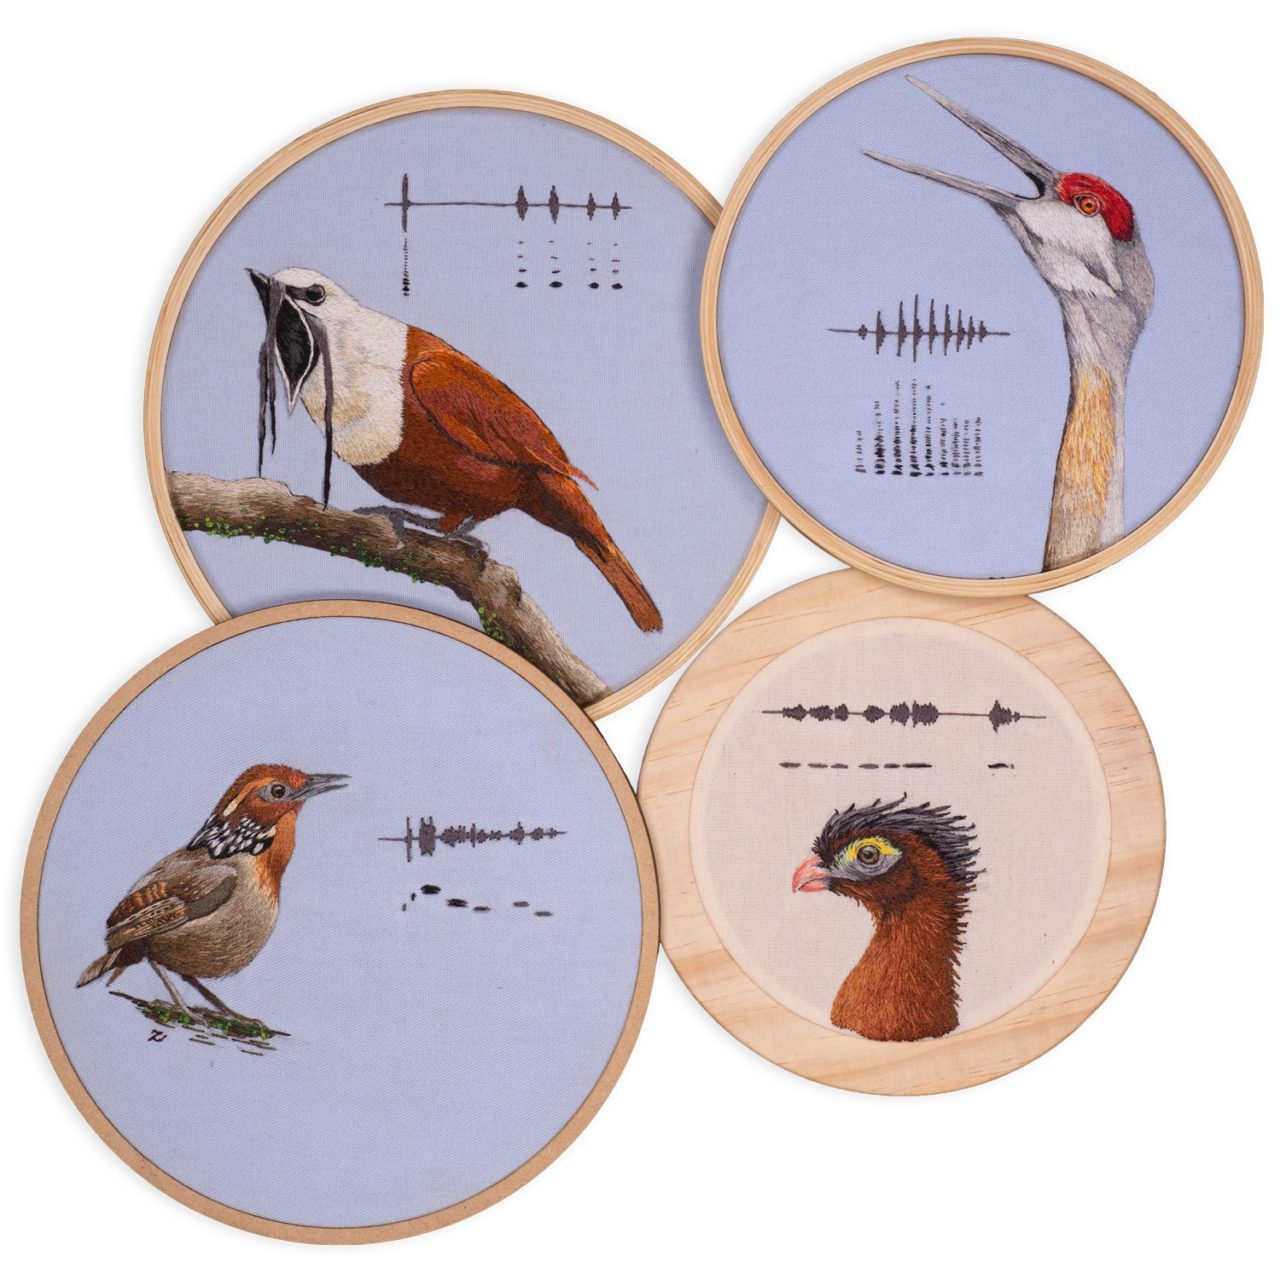 Gallery: Embroidered Birds for the Eye and Ear